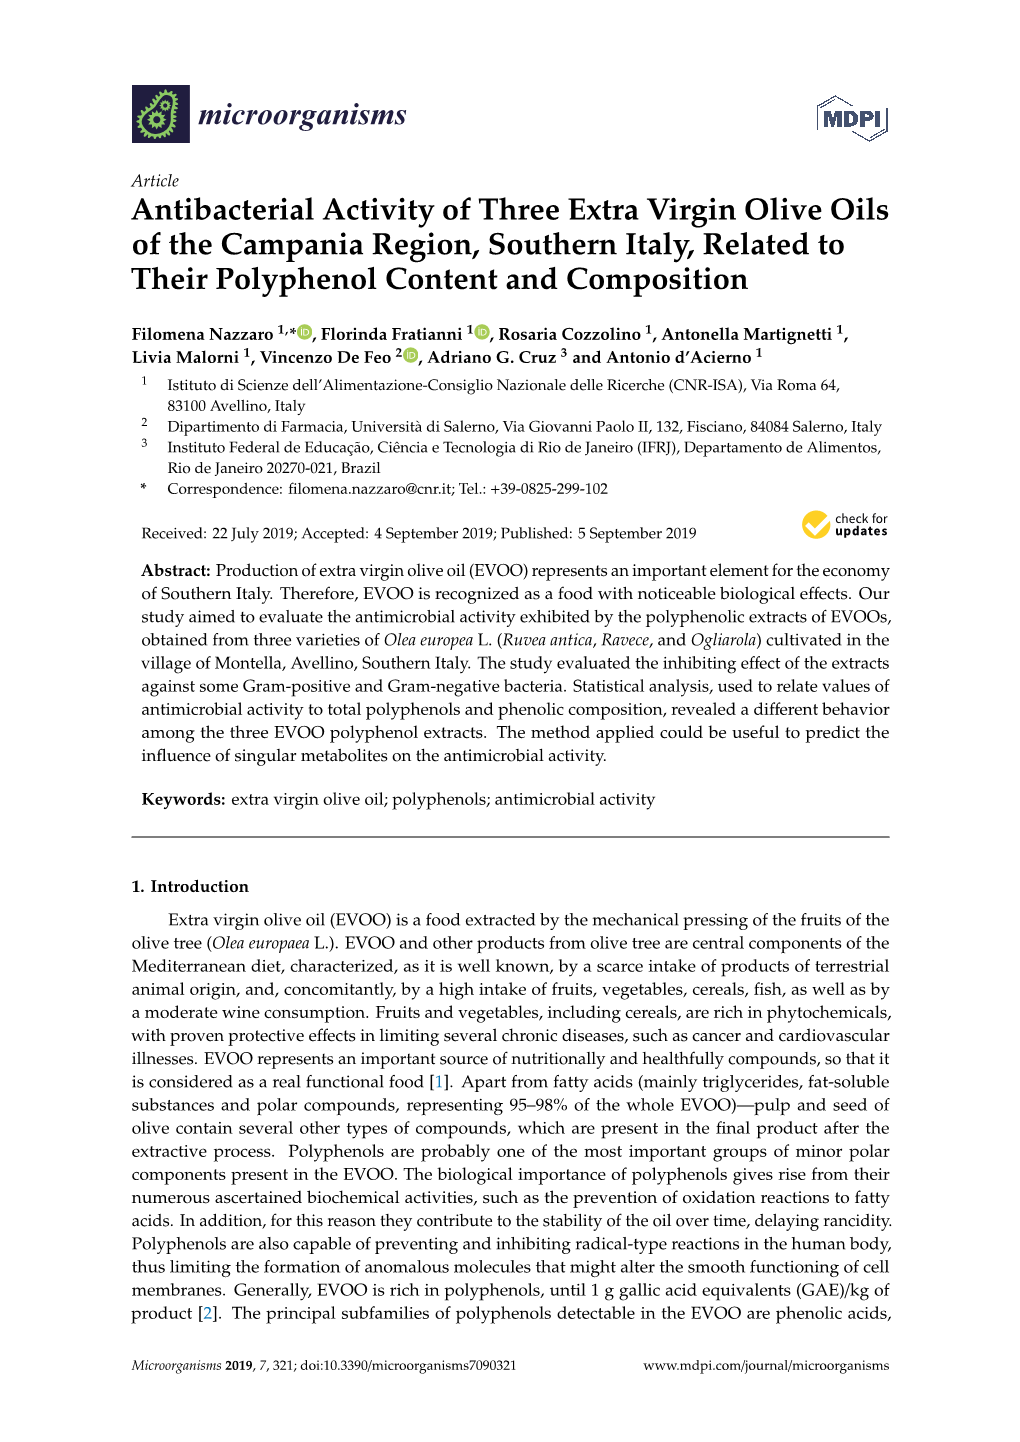 Antibacterial Activity of Three Extra Virgin Olive Oils of the Campania Region, Southern Italy, Related to Their Polyphenol Content and Composition